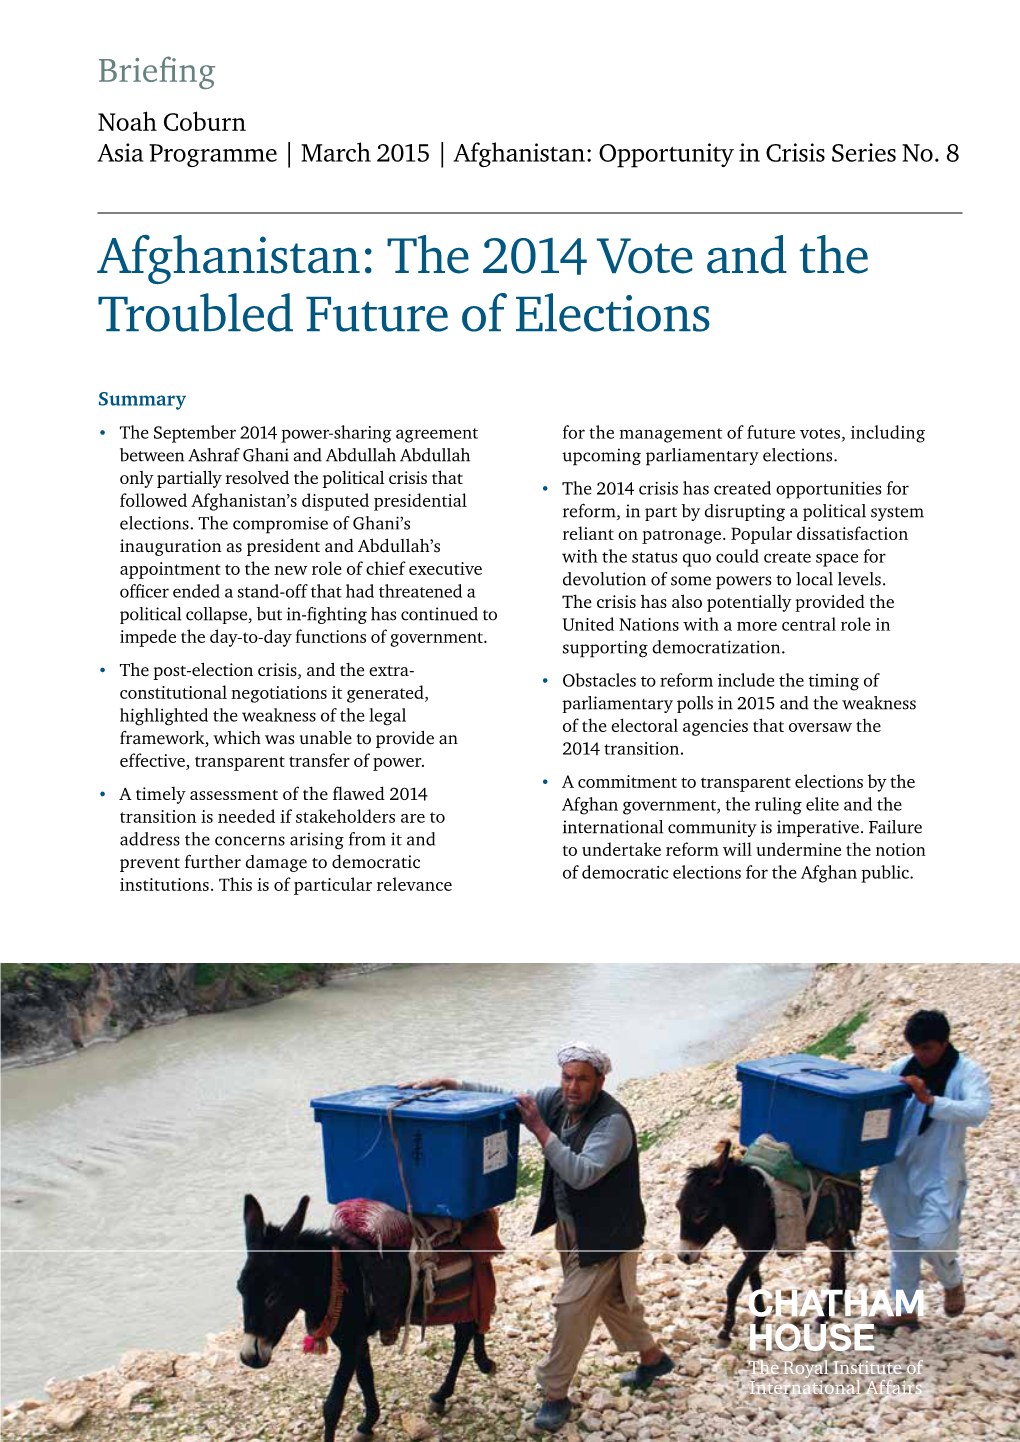 Afghanistan: Opportunity in Crisis Series No